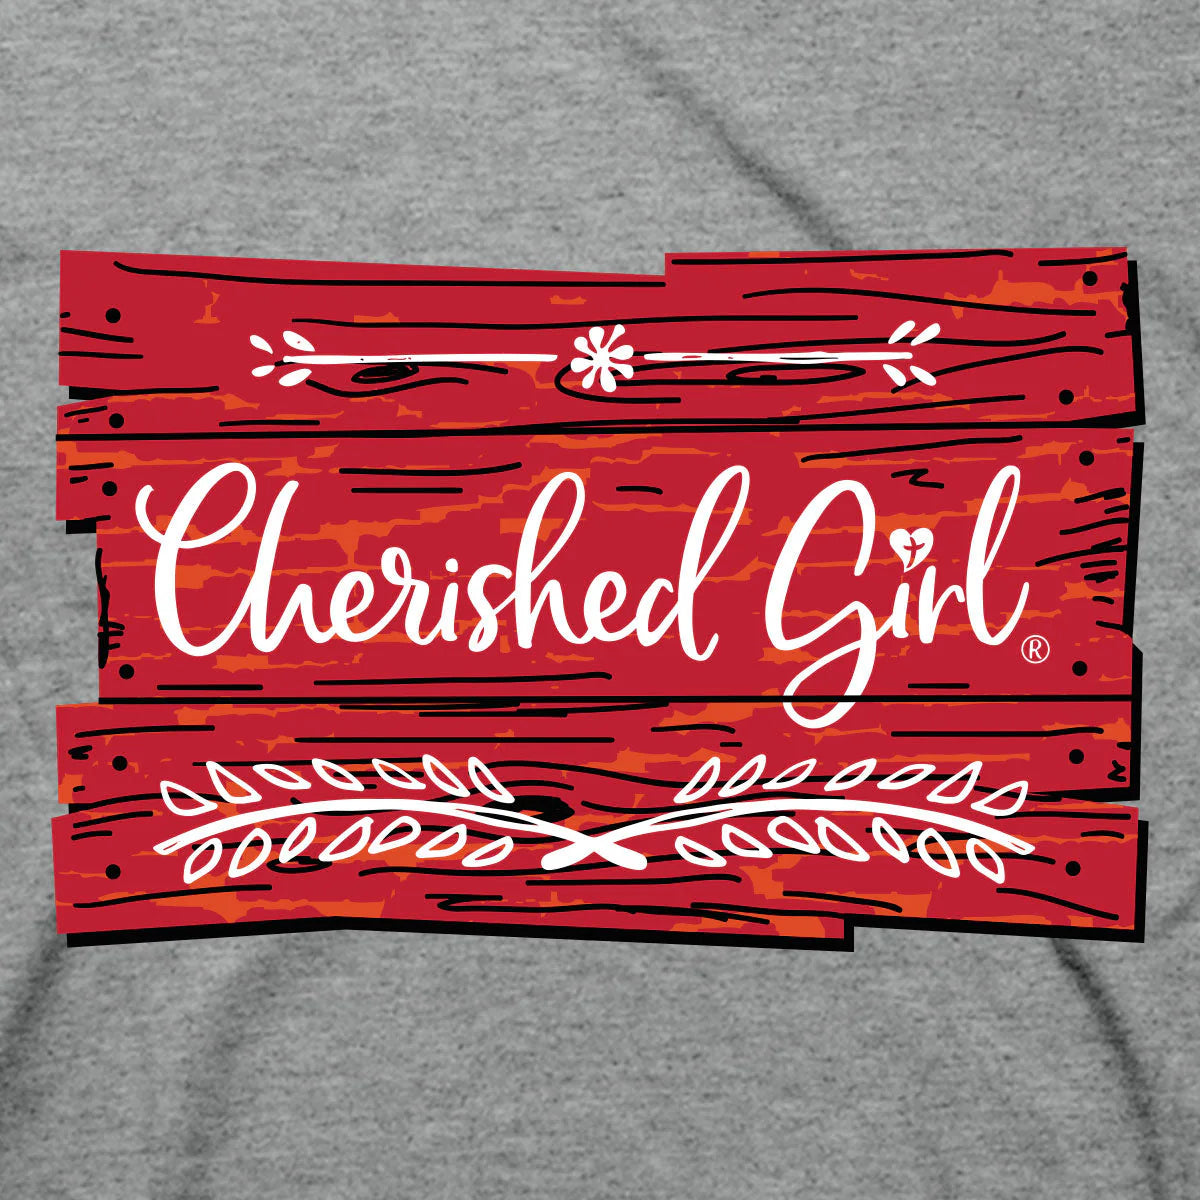 Cherished Girl Womens T-Shirt Plant Wisely Cherished Girl® Apparel Short Sleeve T-shirts Women's